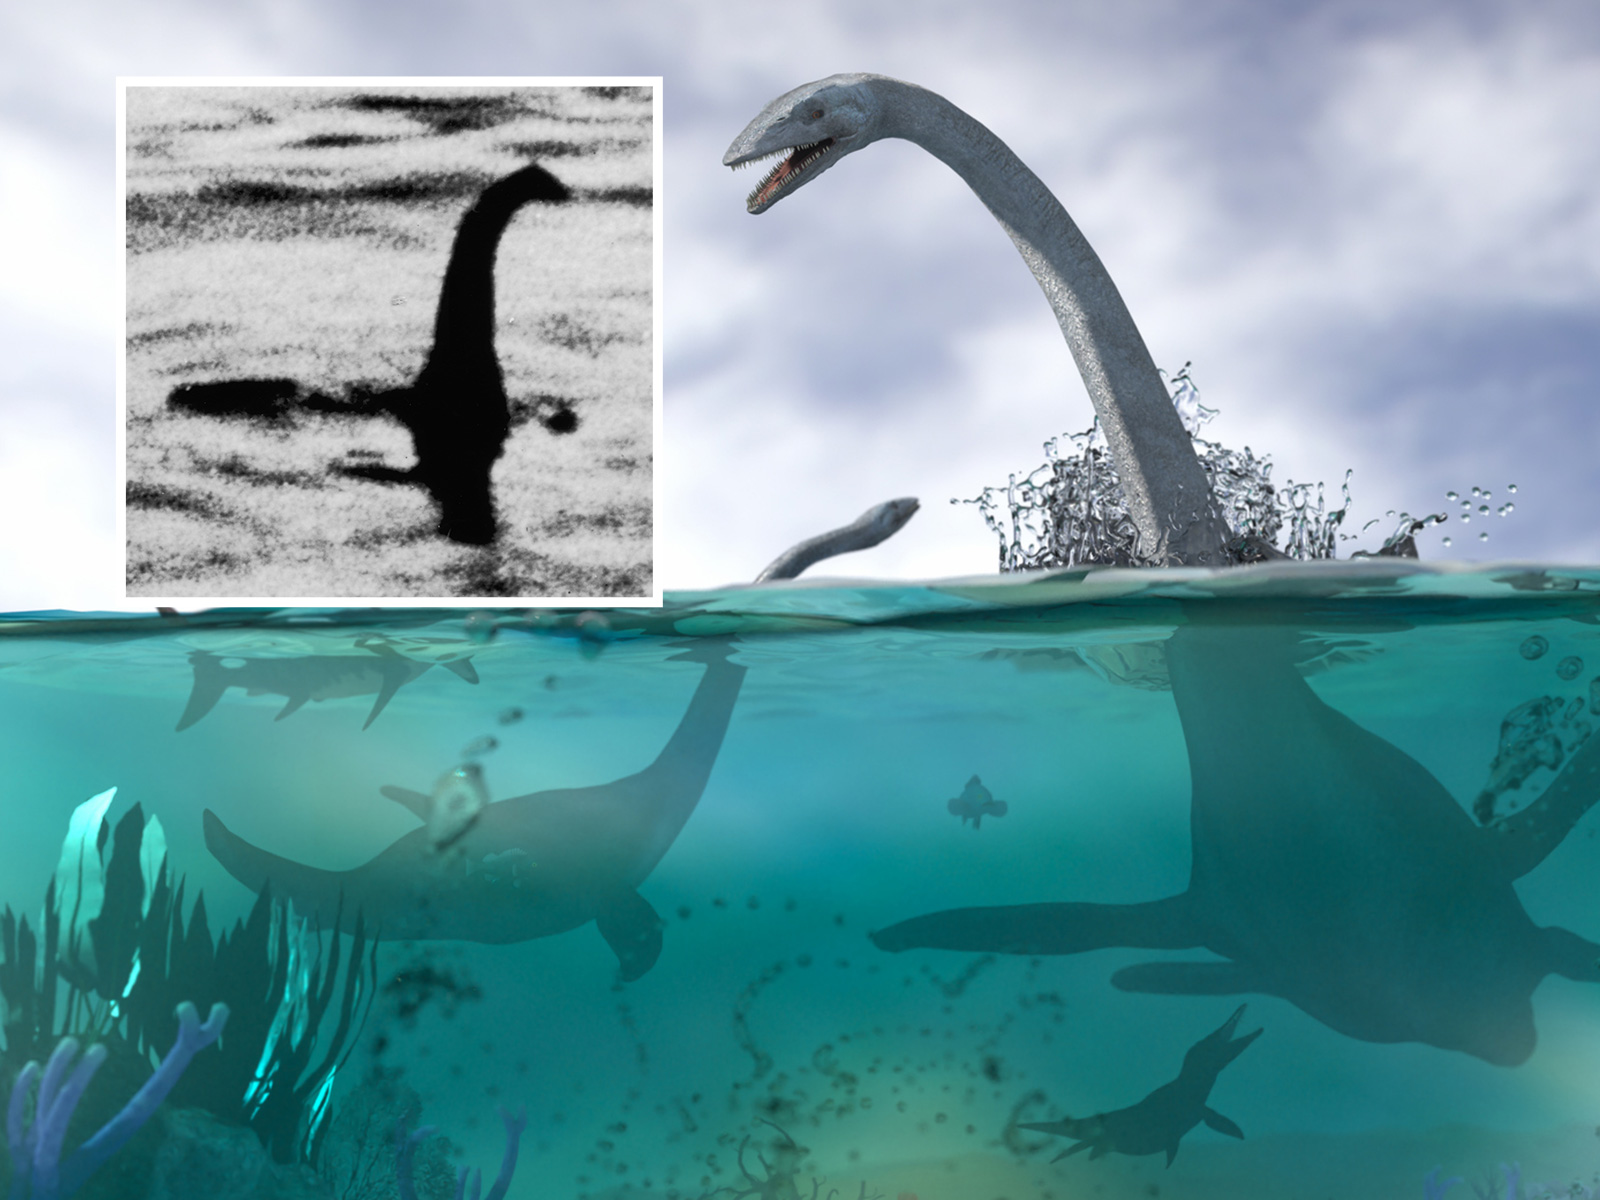 Loch Ness Monster Existence Plausible, Scientists Say